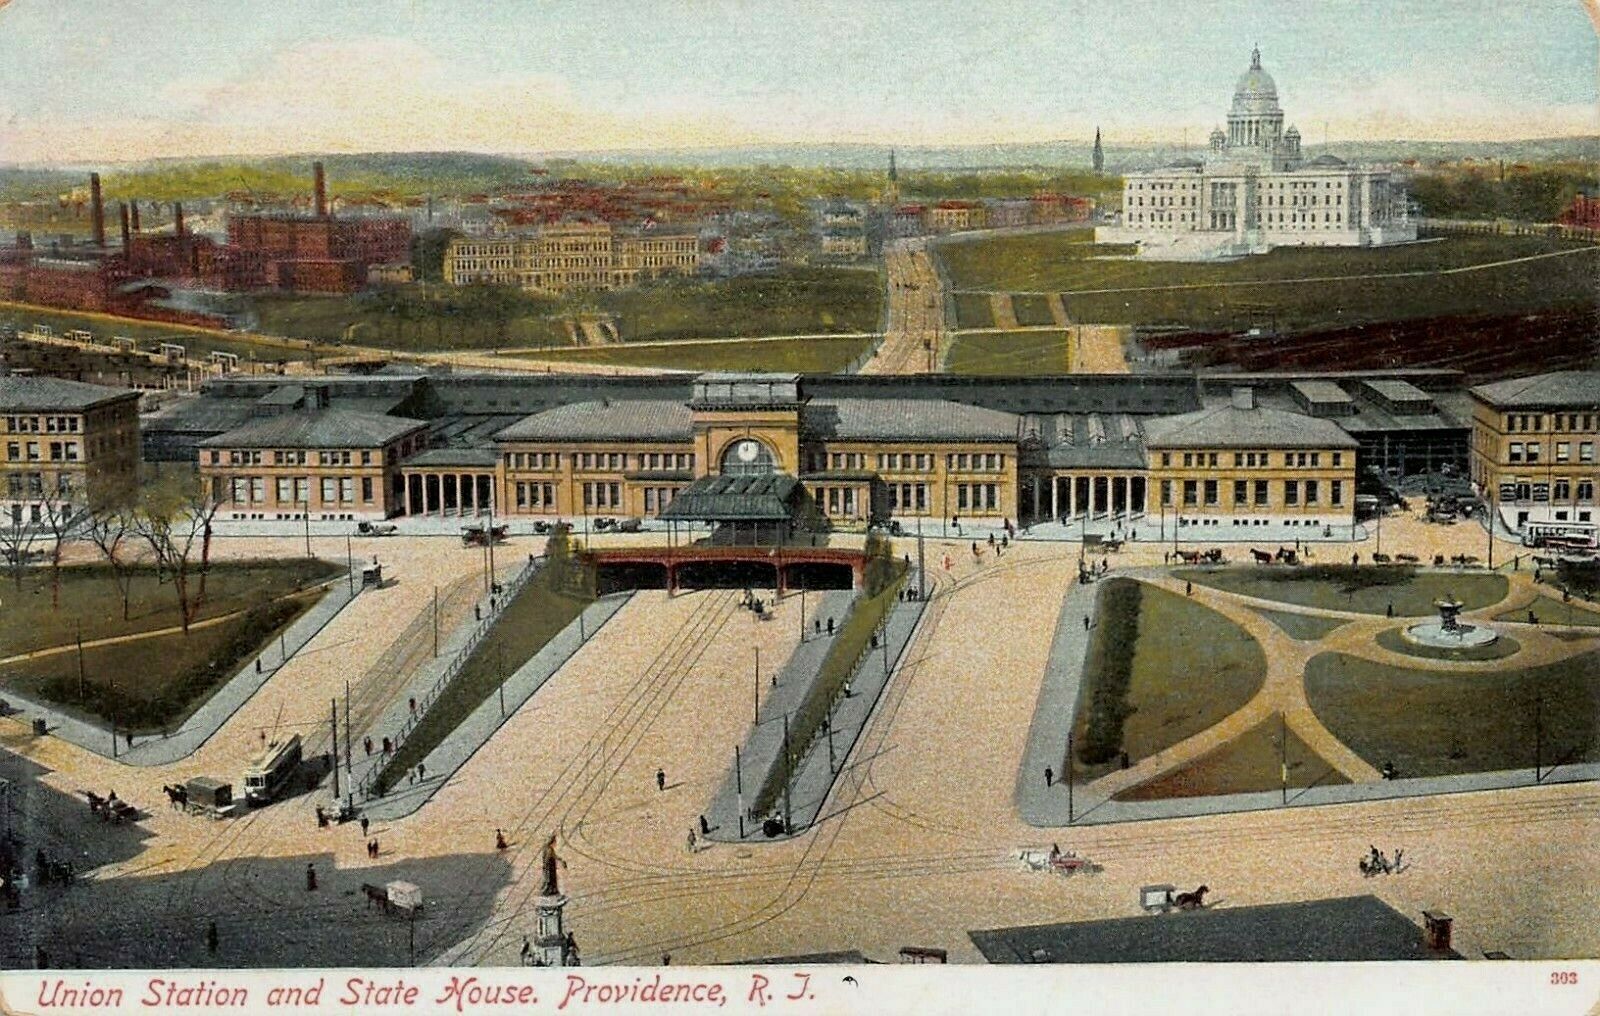 Union Station - Train Station and State House, Providence, R.I. Early Postcard